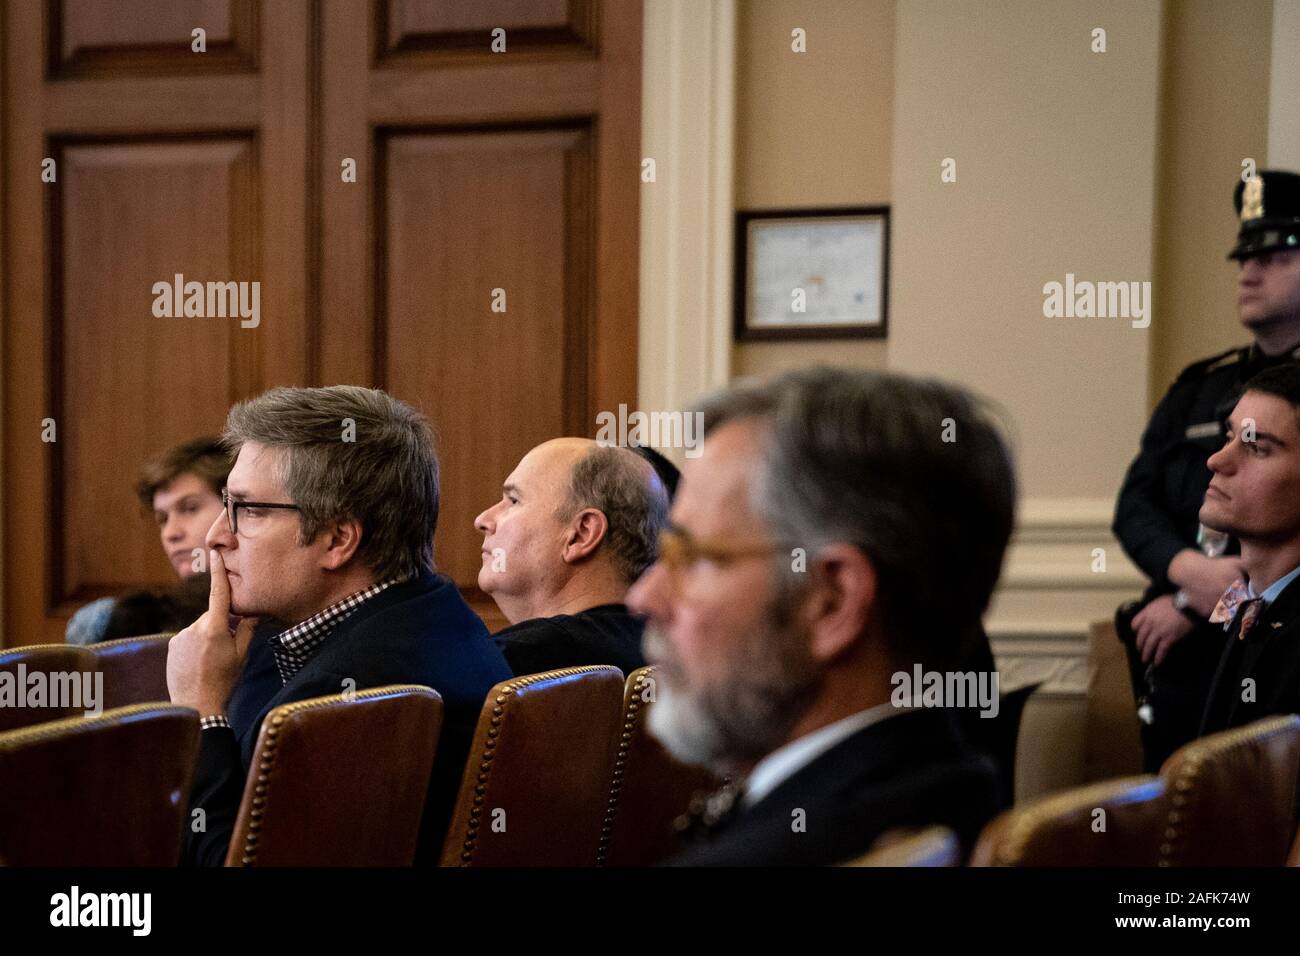 People in the audience watch a United States House Intelligence Committee impeachment inquiry hearing with Laura Cooper, deputy assistant secretary of defense for Russia, Ukraine and Eurasia, and David Hale, undersecretary of state for political affairs, on Capitol Hill in Washington, DC on November 20, 2019. Credit: Erin Schaff/Pool via CNP Stock Photo